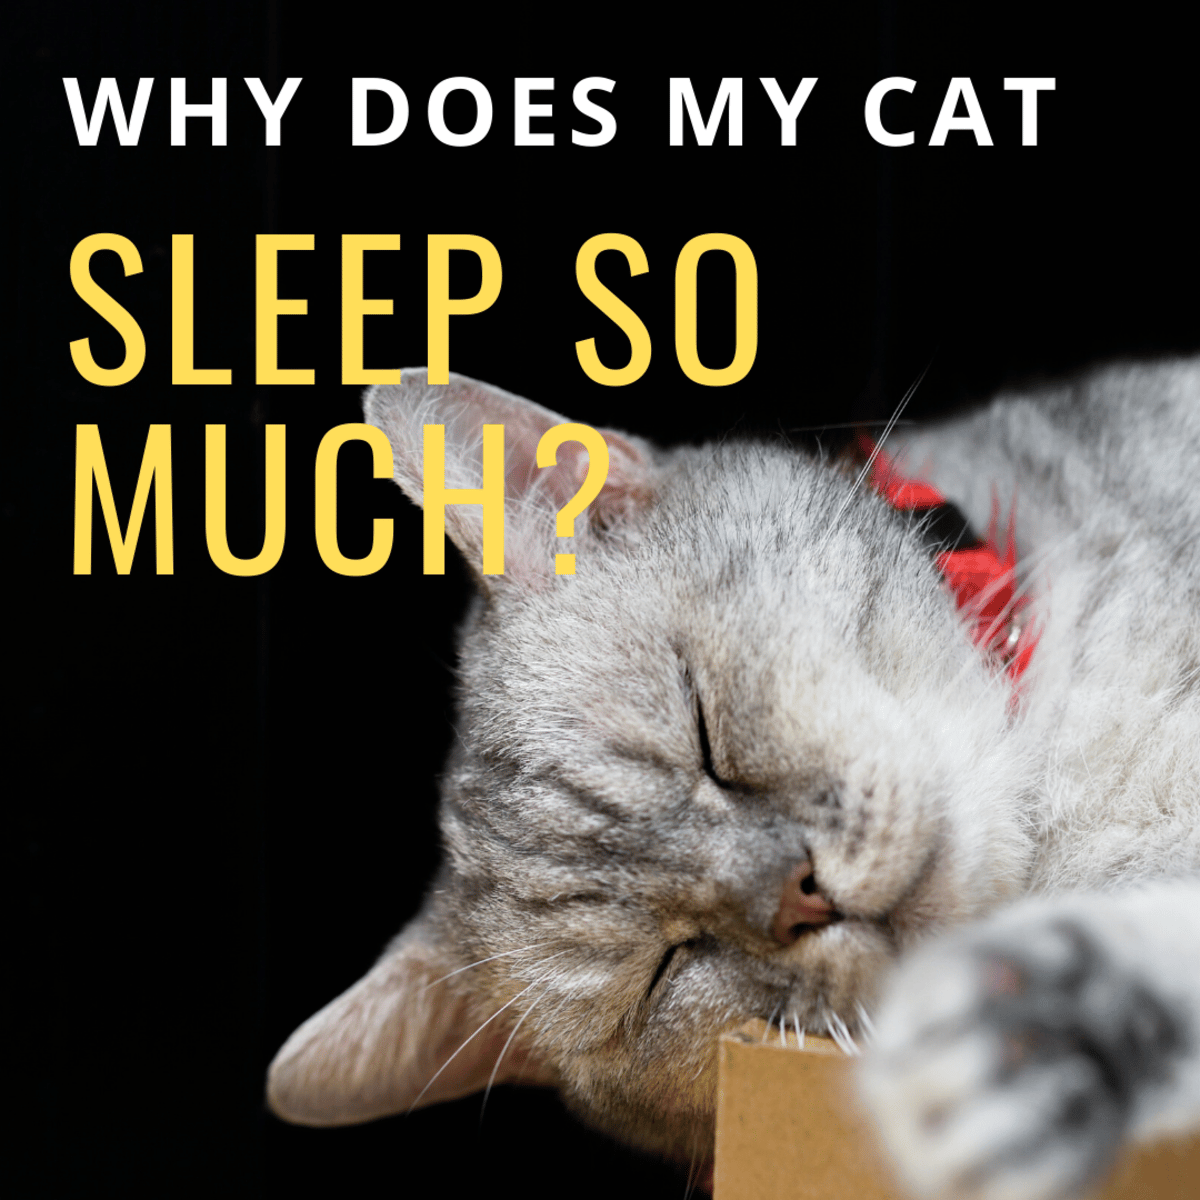 Why Does My Cat Sleep so Much?